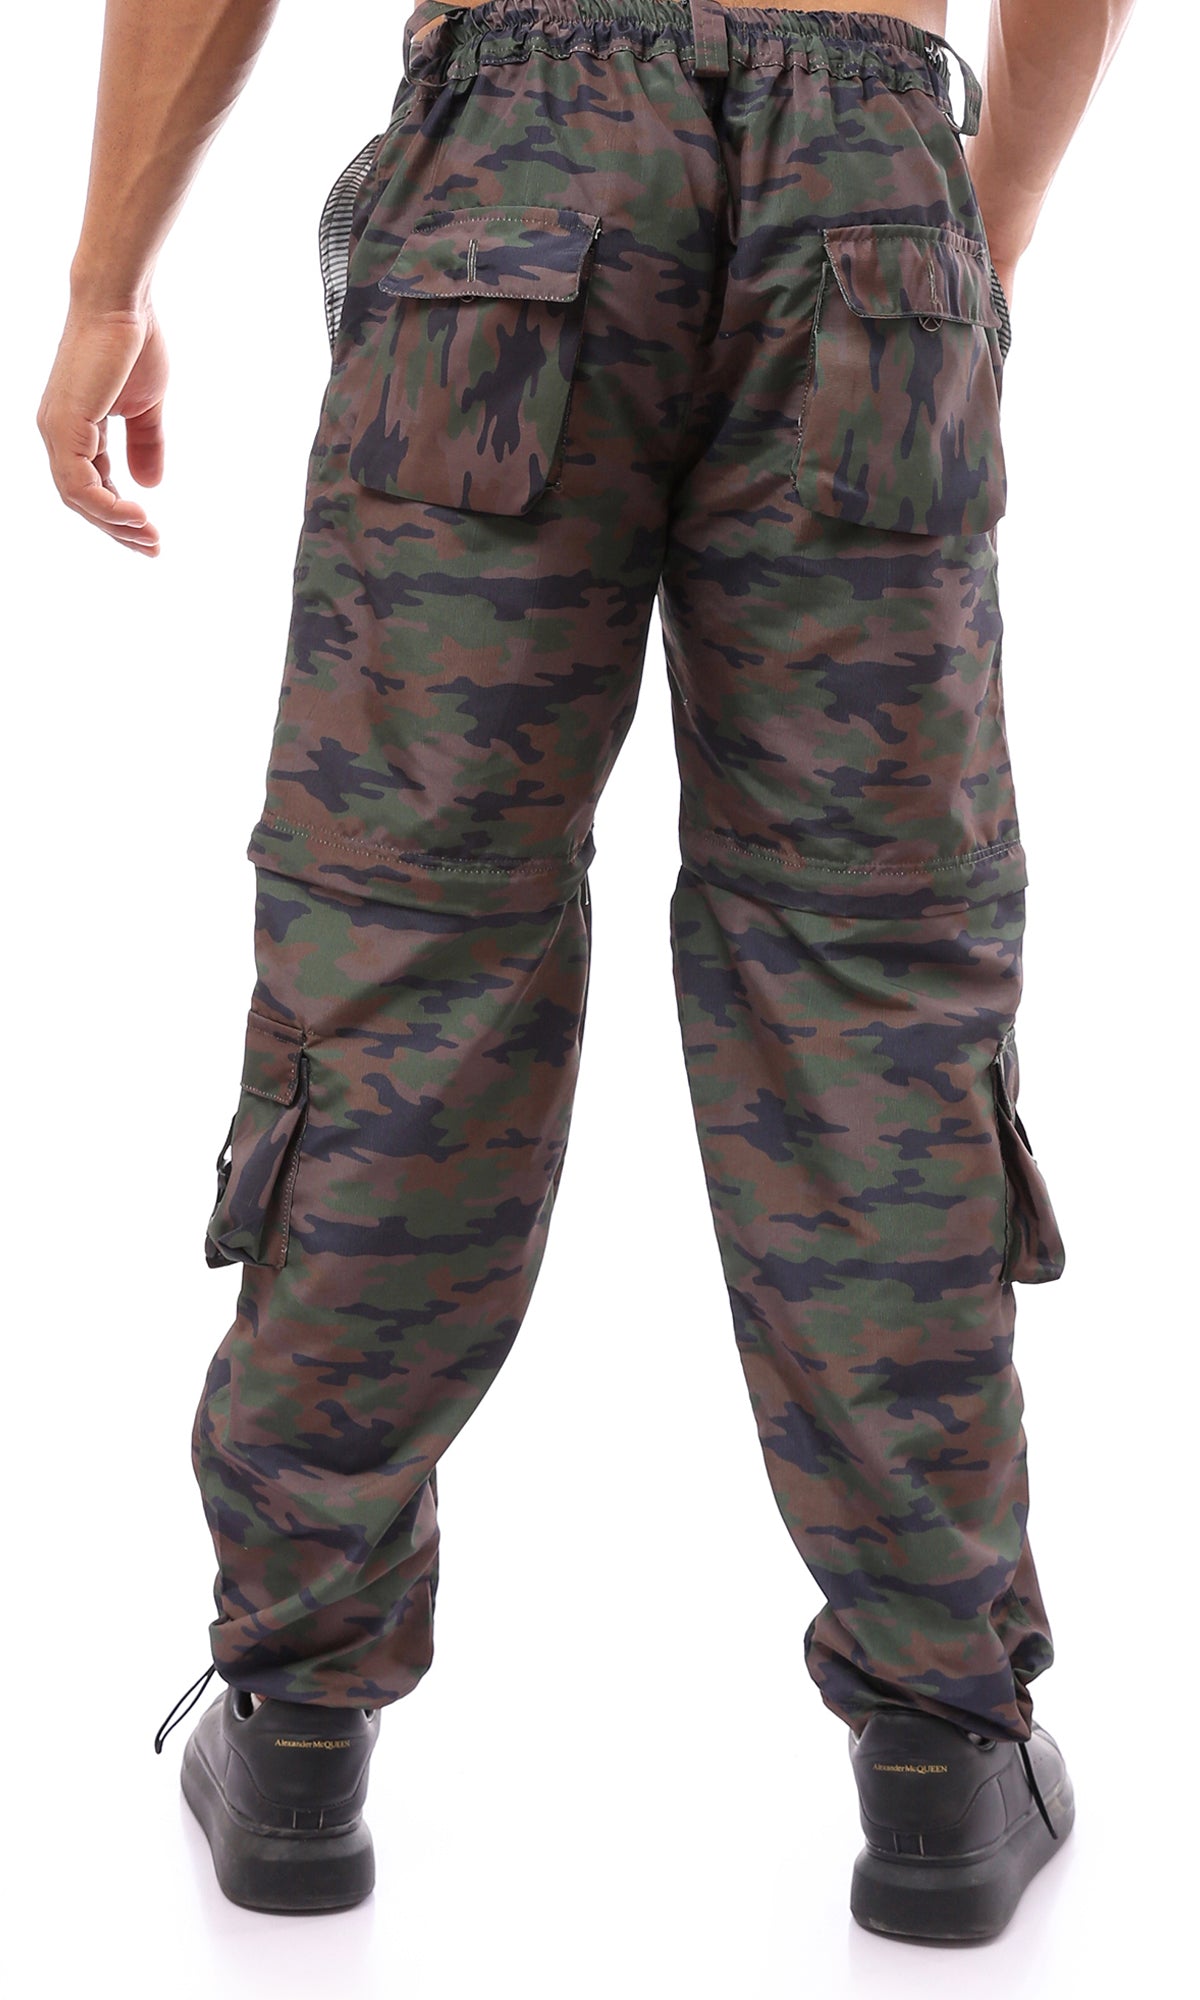 O174620 Multicolour Camouflage Cargo Pants With Belt Loops